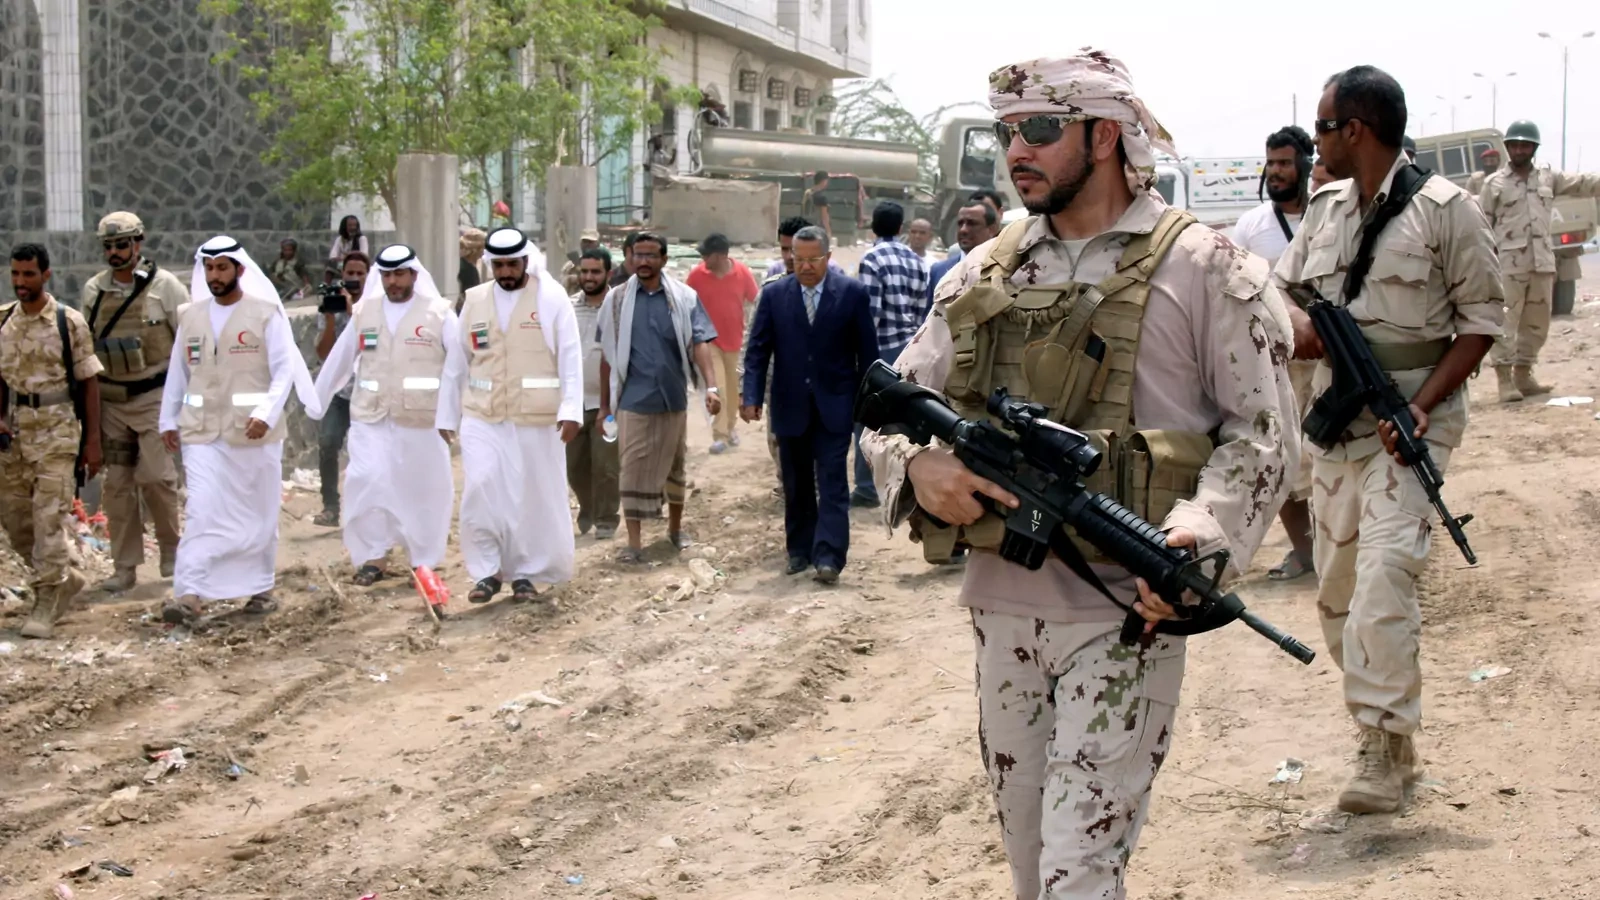 An Emirati soldier escorts Yemen's prime minister in the port city of Mukha.